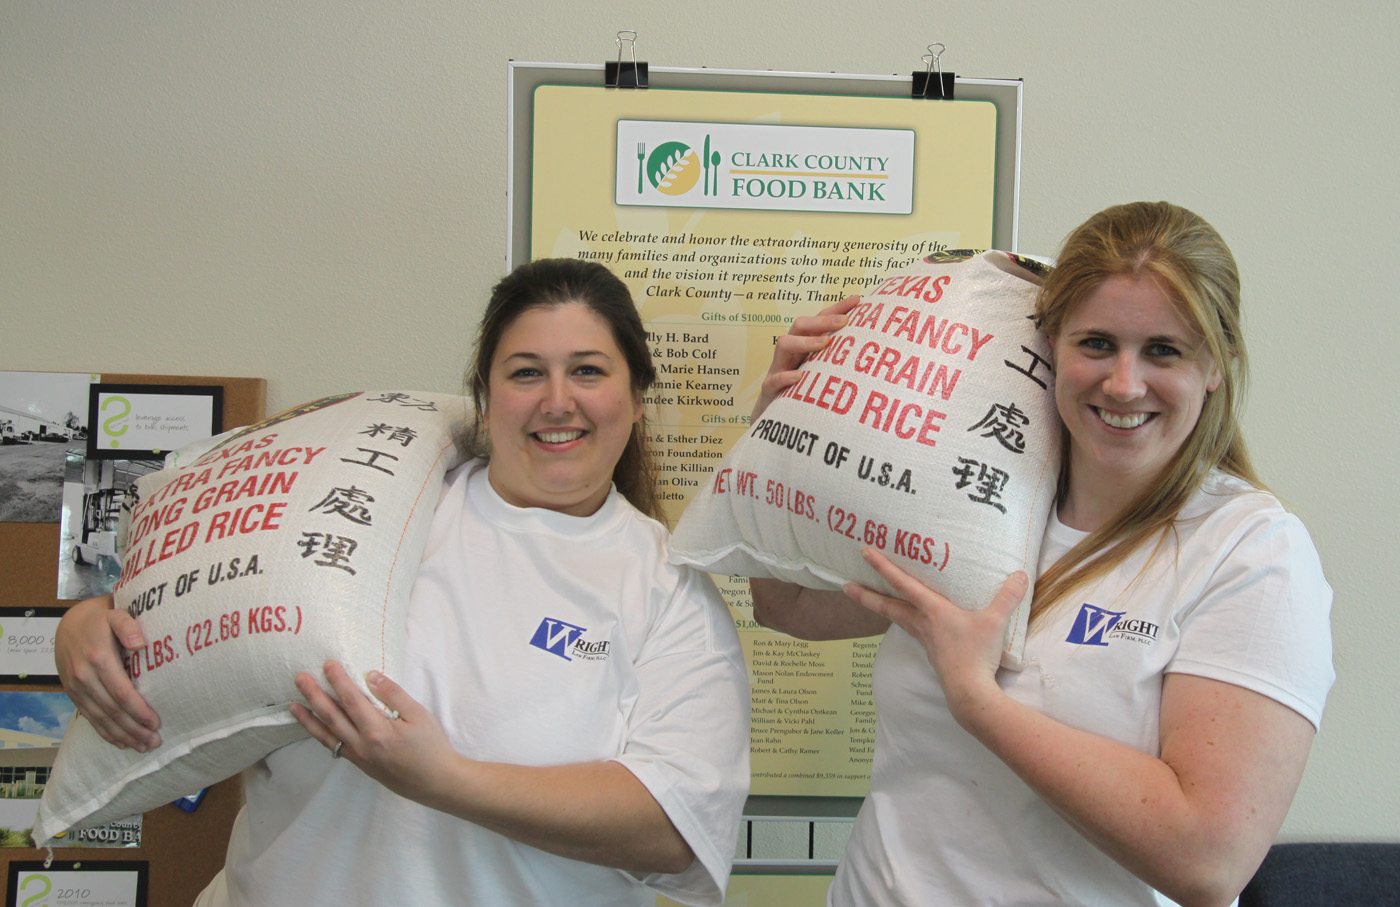 Esther Short: From left, Erin Wright, founder of the Wright Law Firm, and Courtney Claybin, paralegal, hold 50-pound bags of rice that the law firm donated to the Clark County Food Bank.